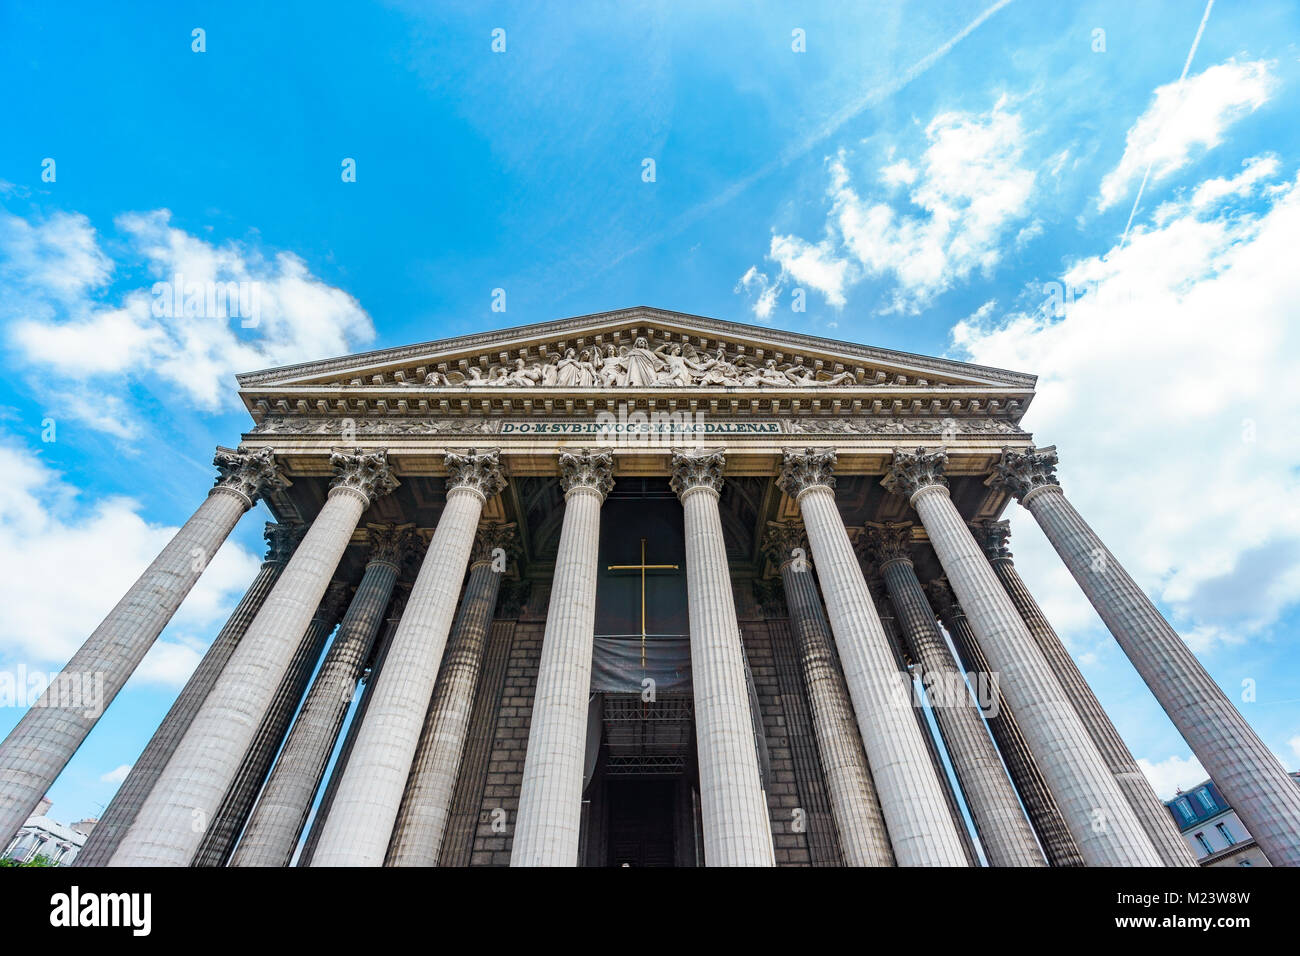 Bottom view of Magdalenae church in Roman style. Paris, France Stock Photo